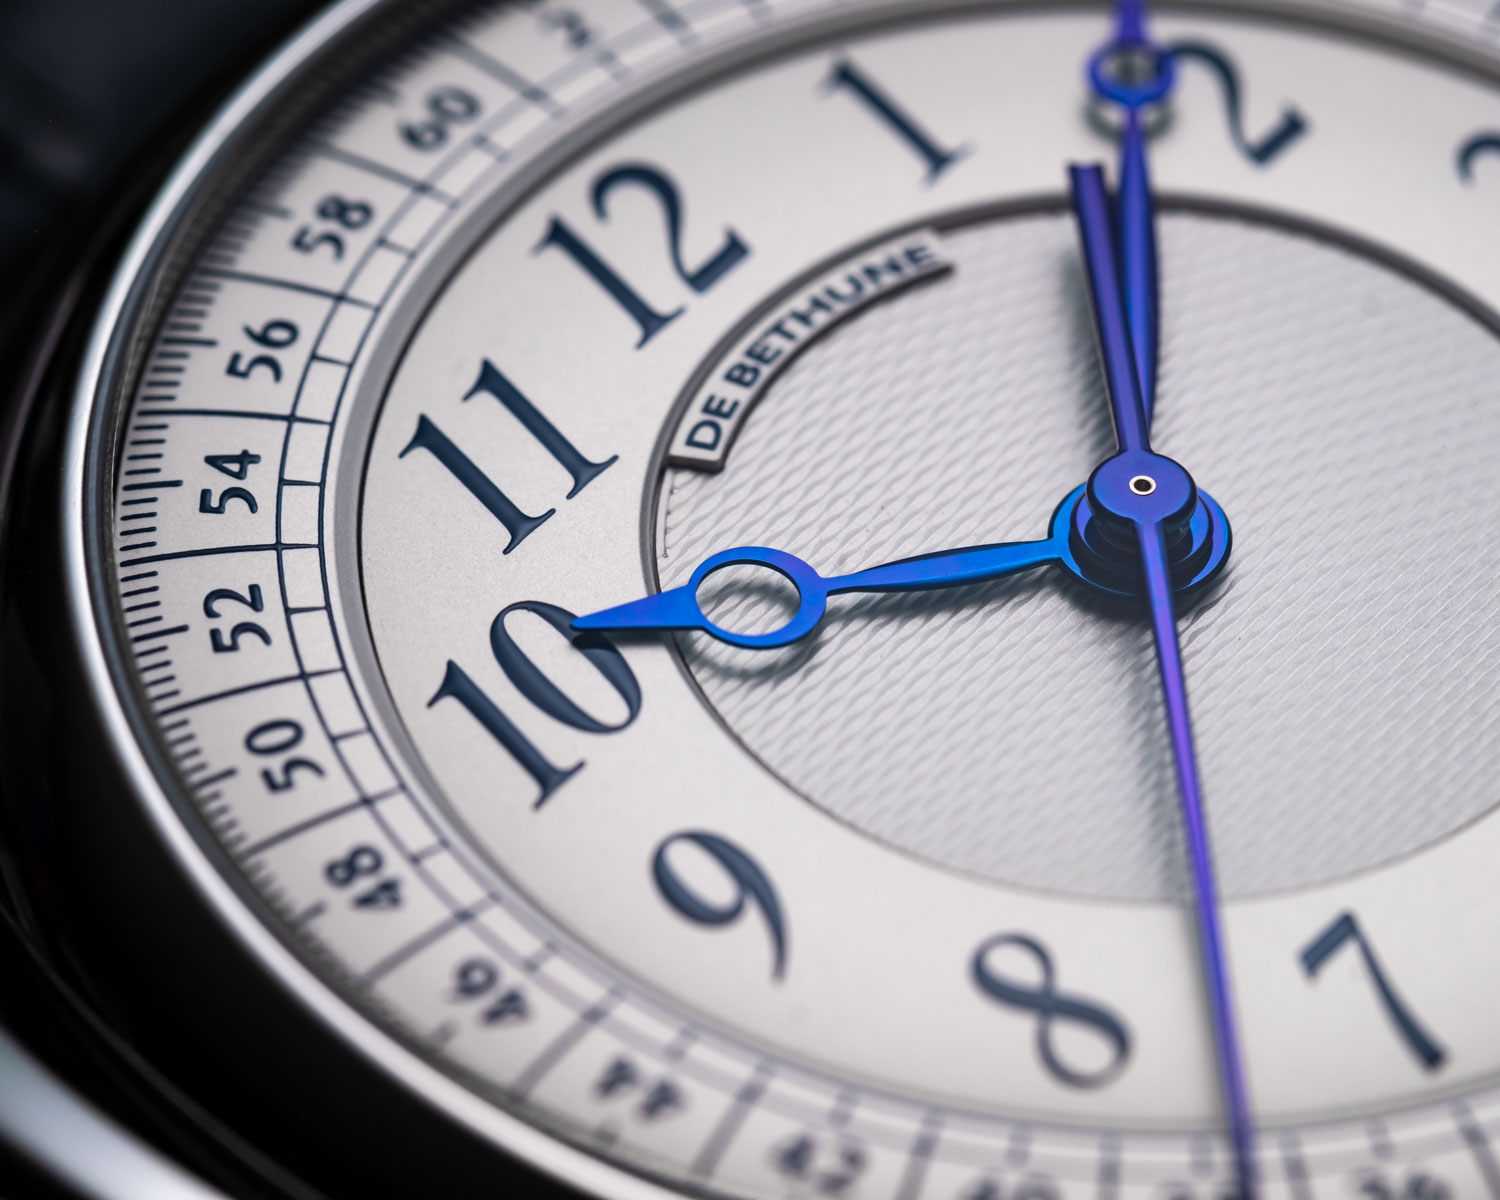 The two-sided De Bethune DB Kind of Two Tourbillon